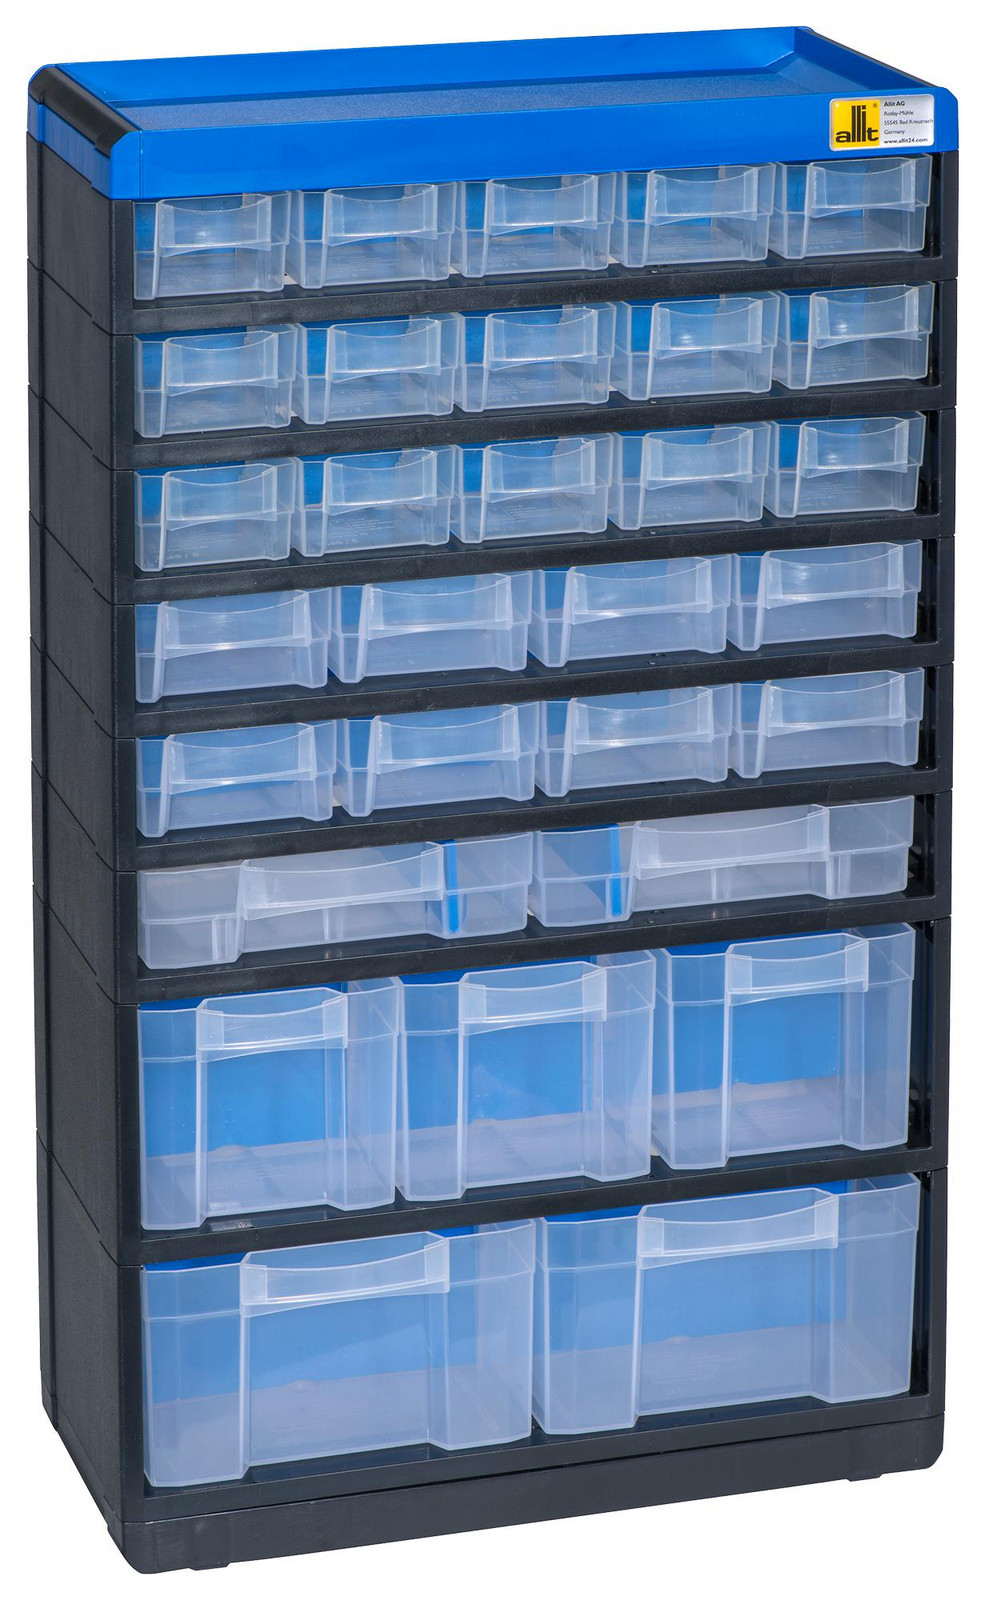 Allit 464650 Small Parts Cabinet, Ps/pp, Black/blue